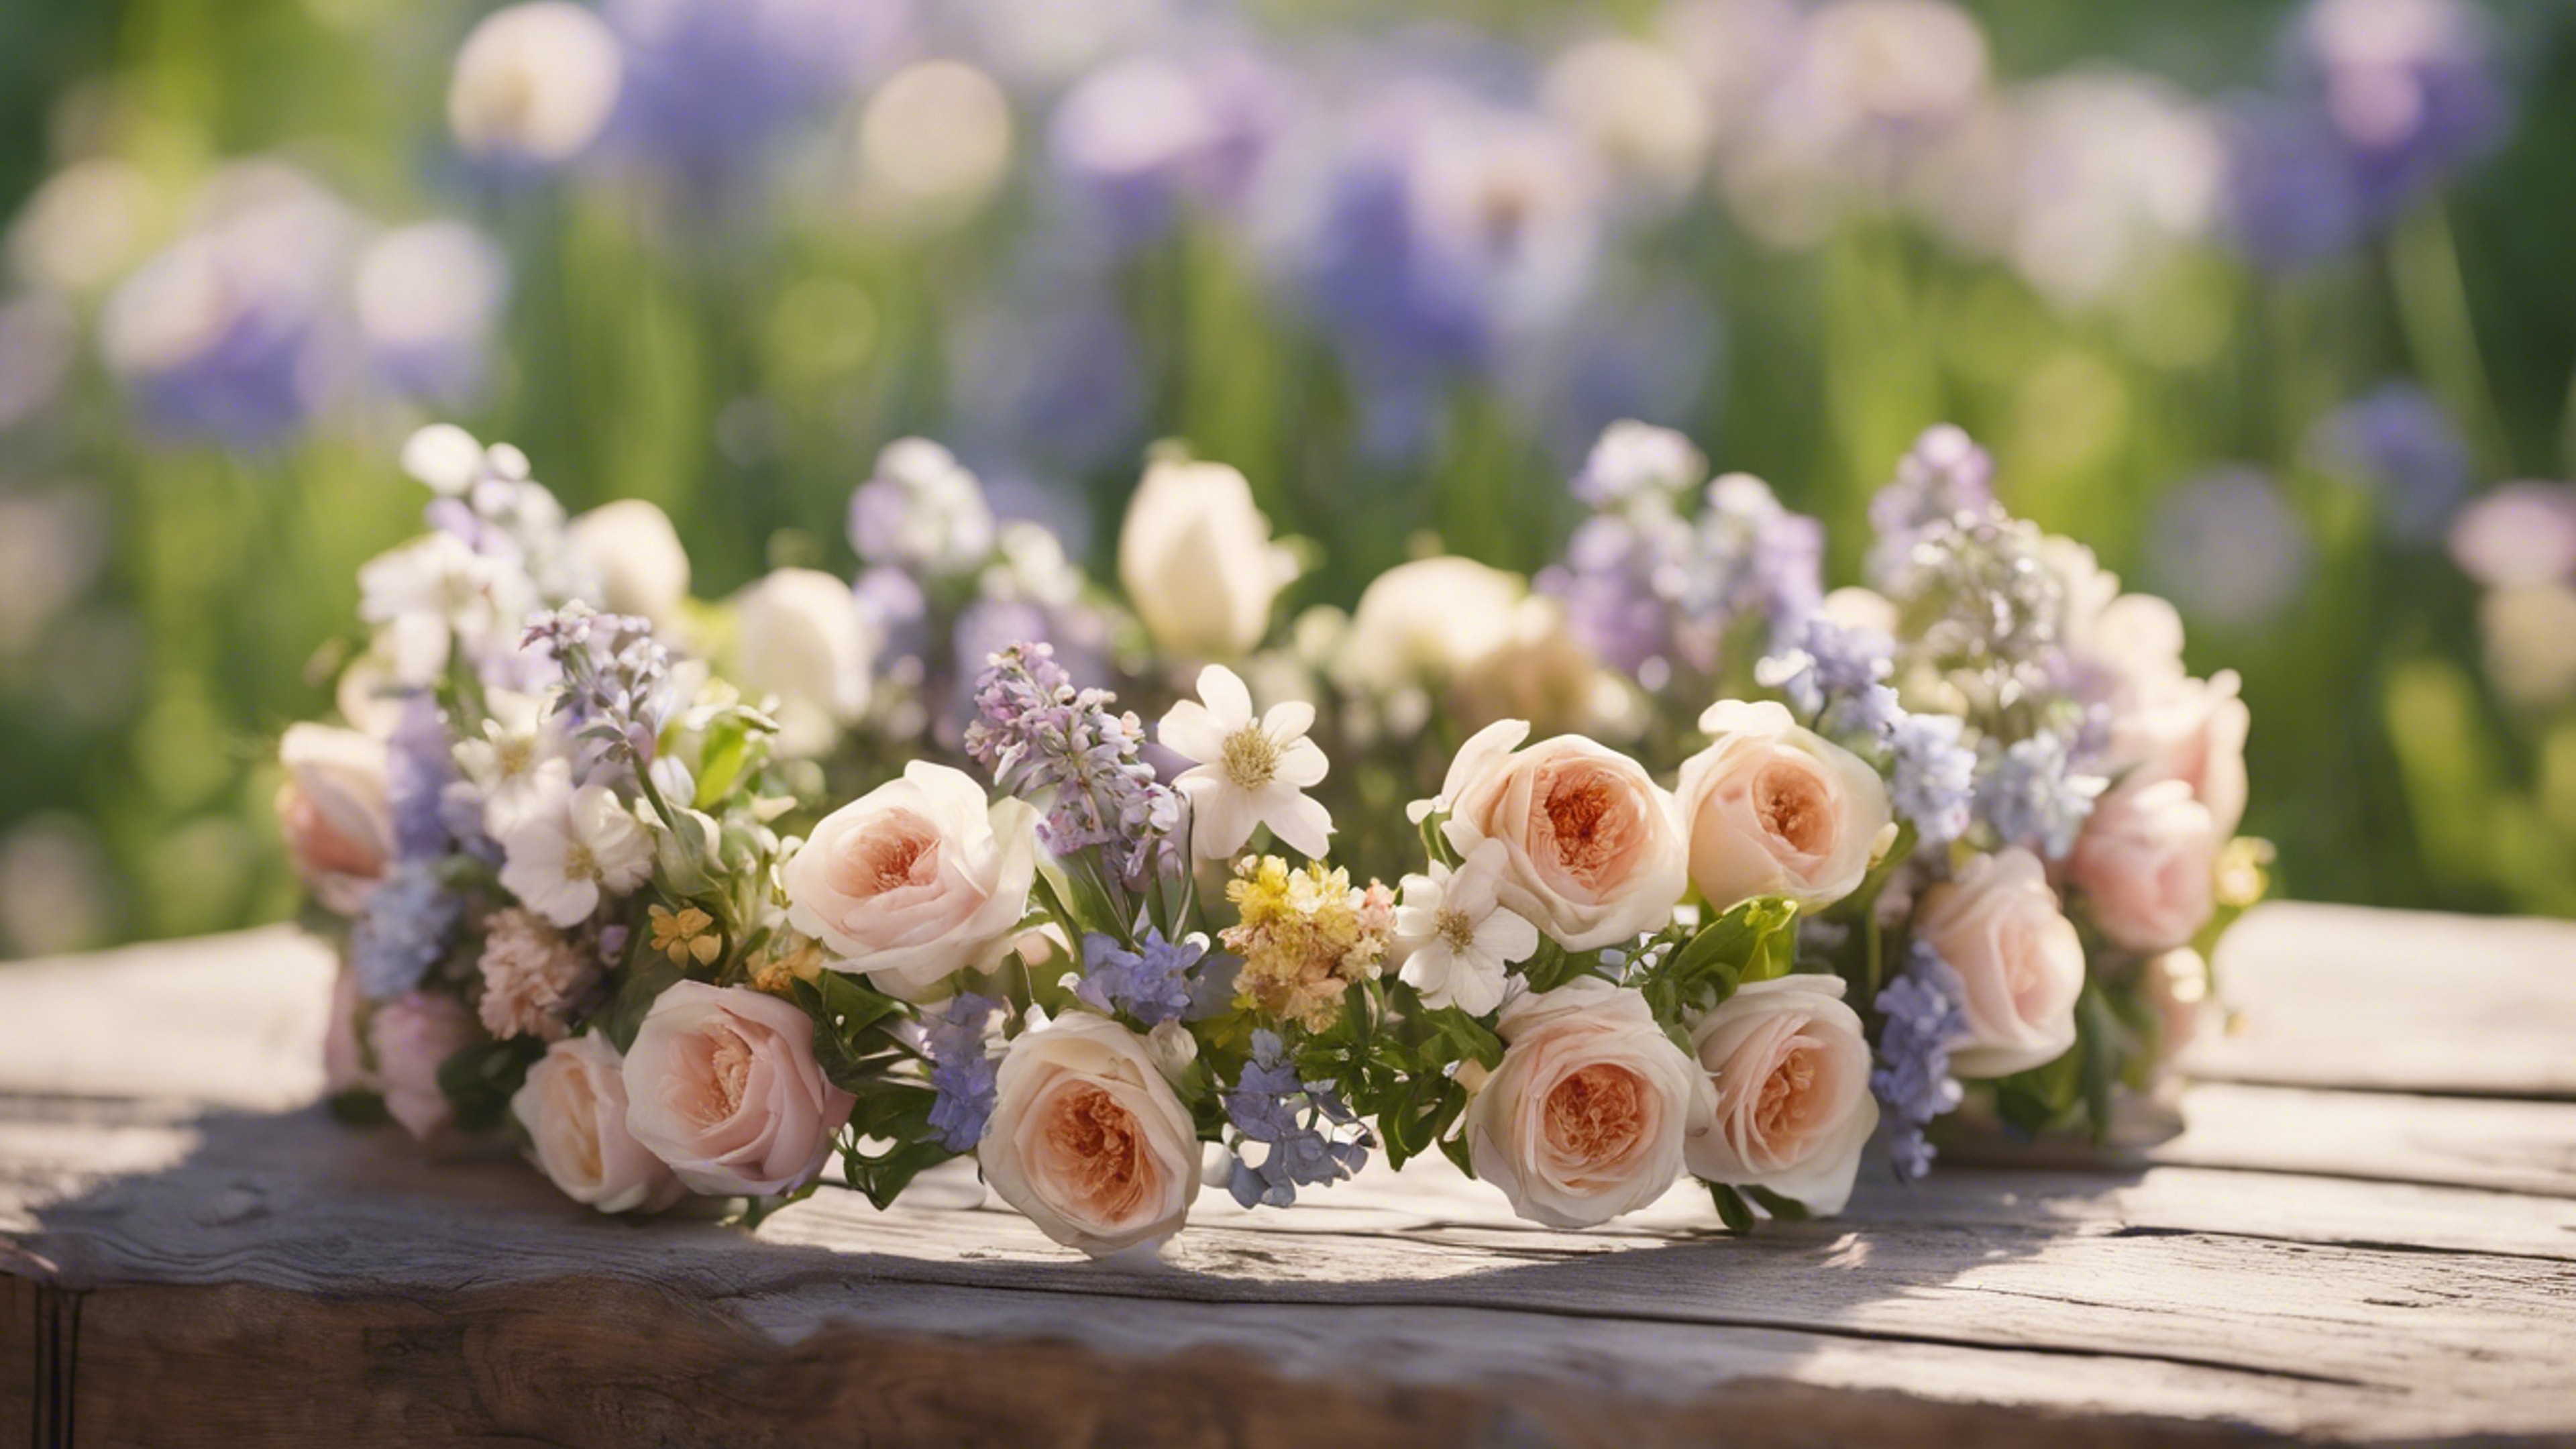 A crown made of fresh spring flowers on a wooden table outdoors. Papel de parede[d5115d6a32bf47389ae3]